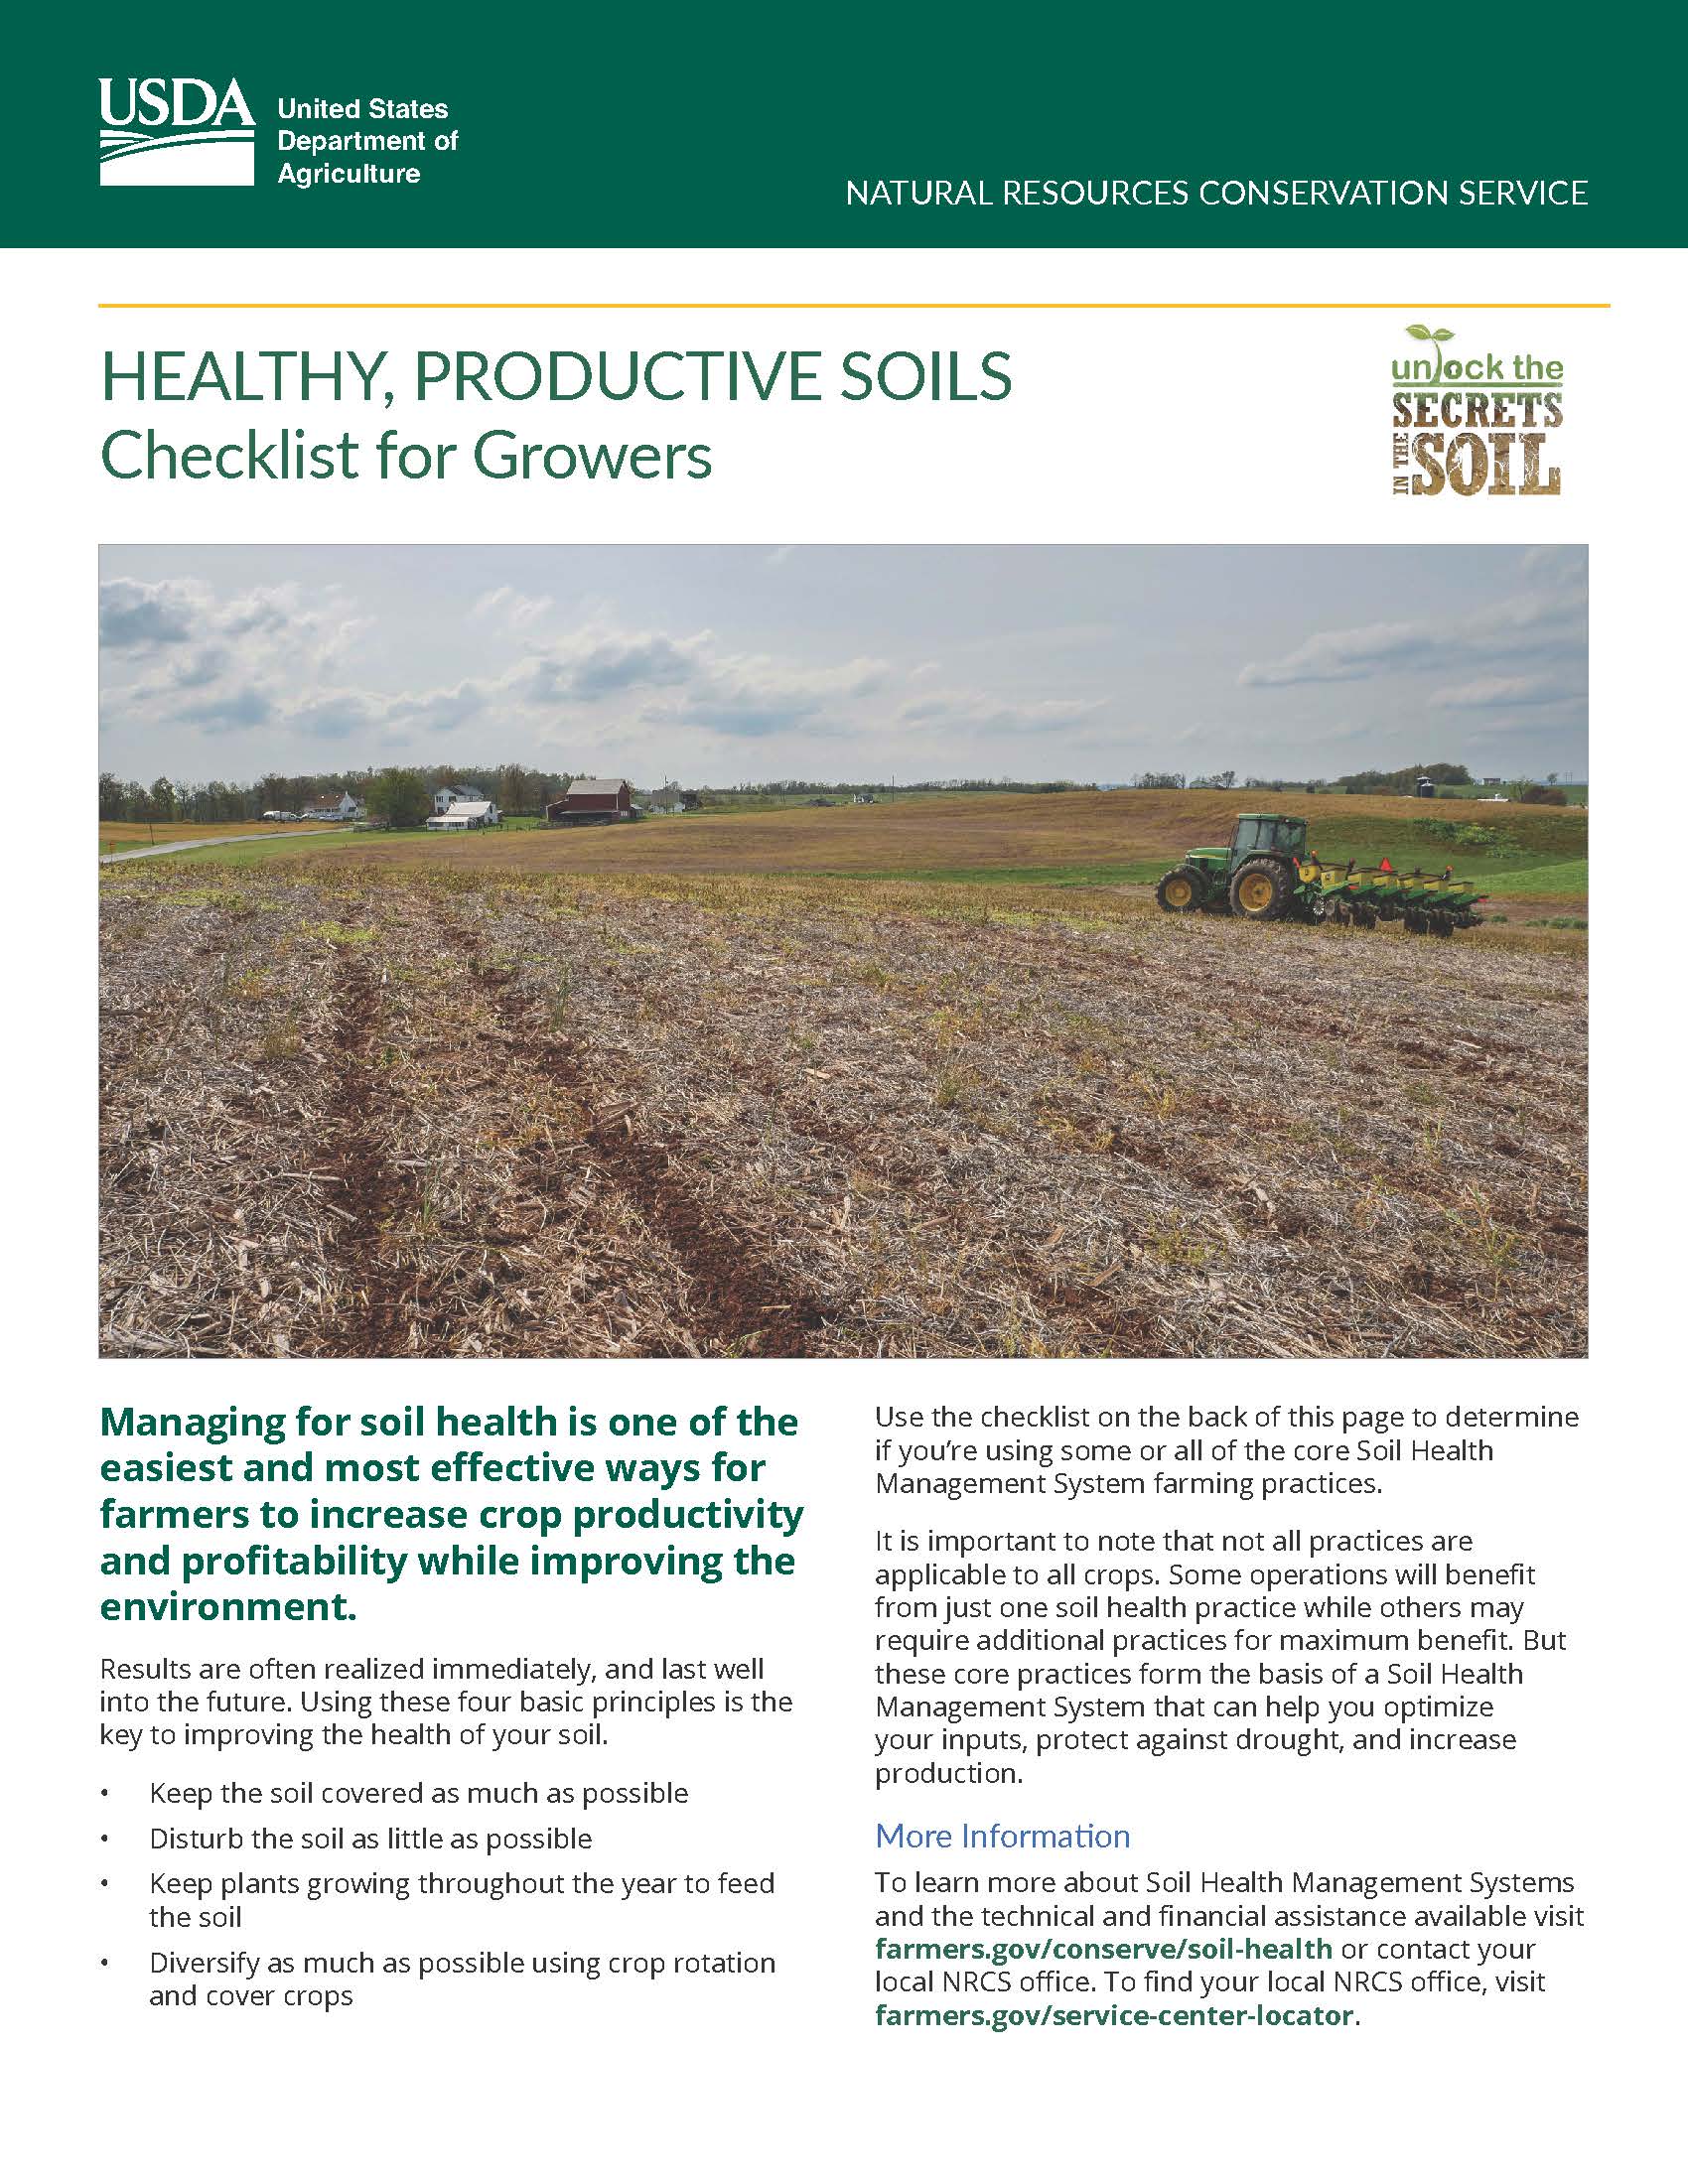 Soil Health Checklist for Growers fact sheet